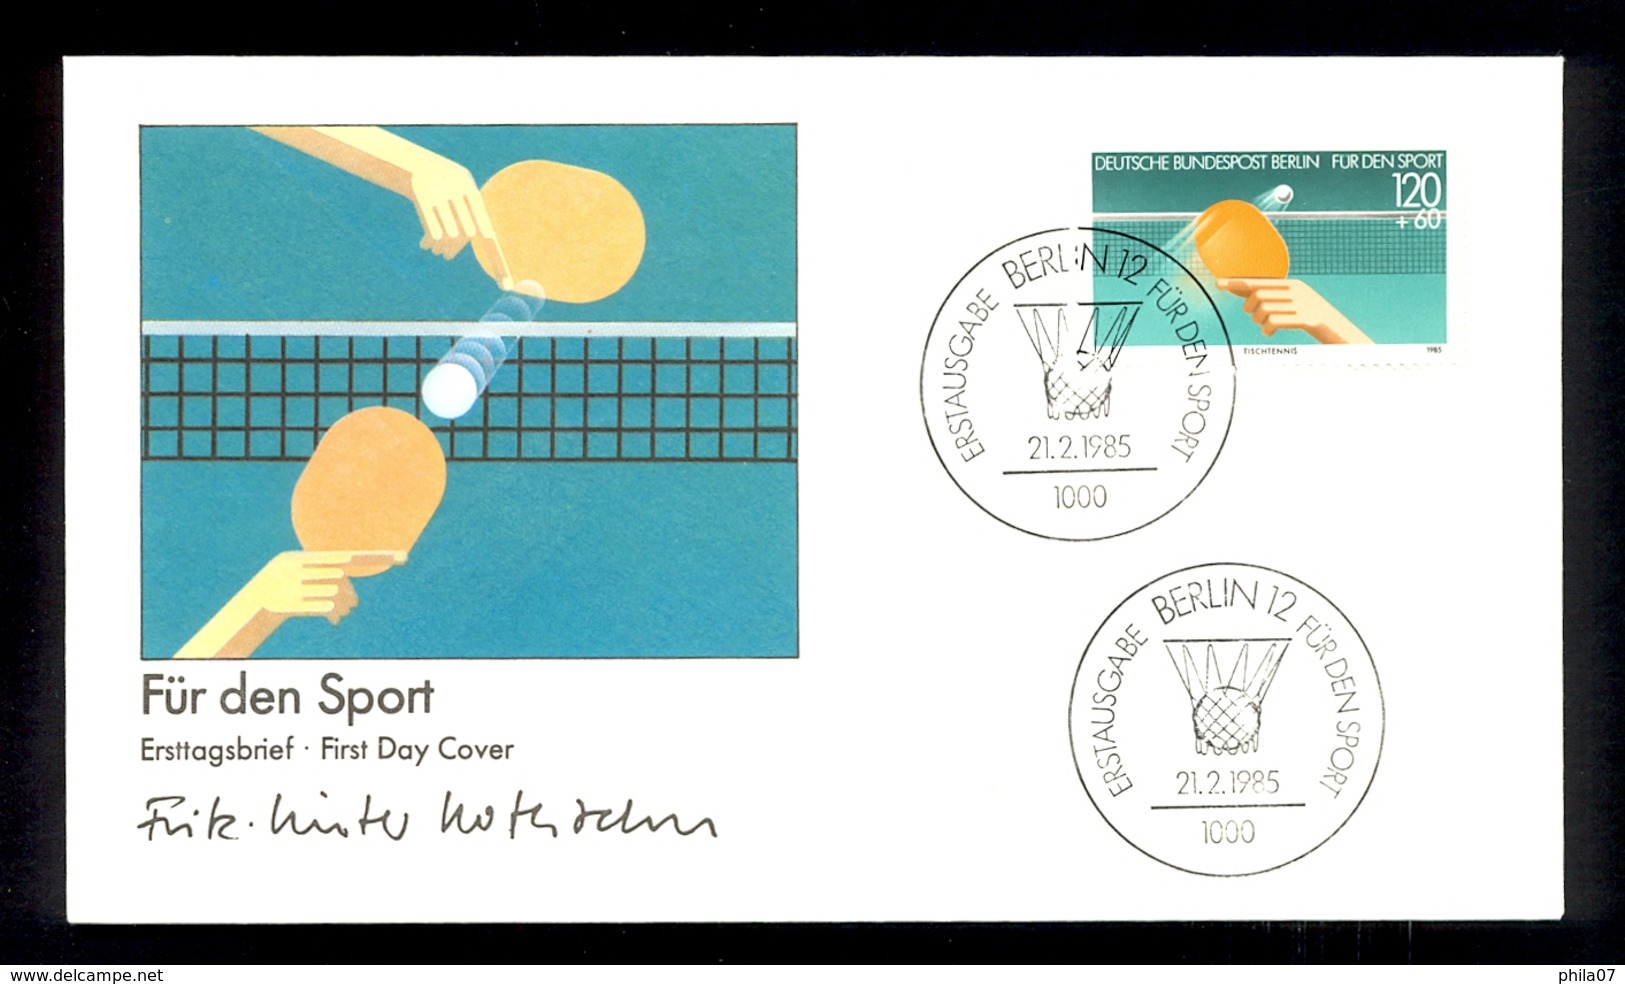 GERMANY 1985 - Commemorative Cover, Cancel And Stamp For TABLE TENNIS - Tennis De Table